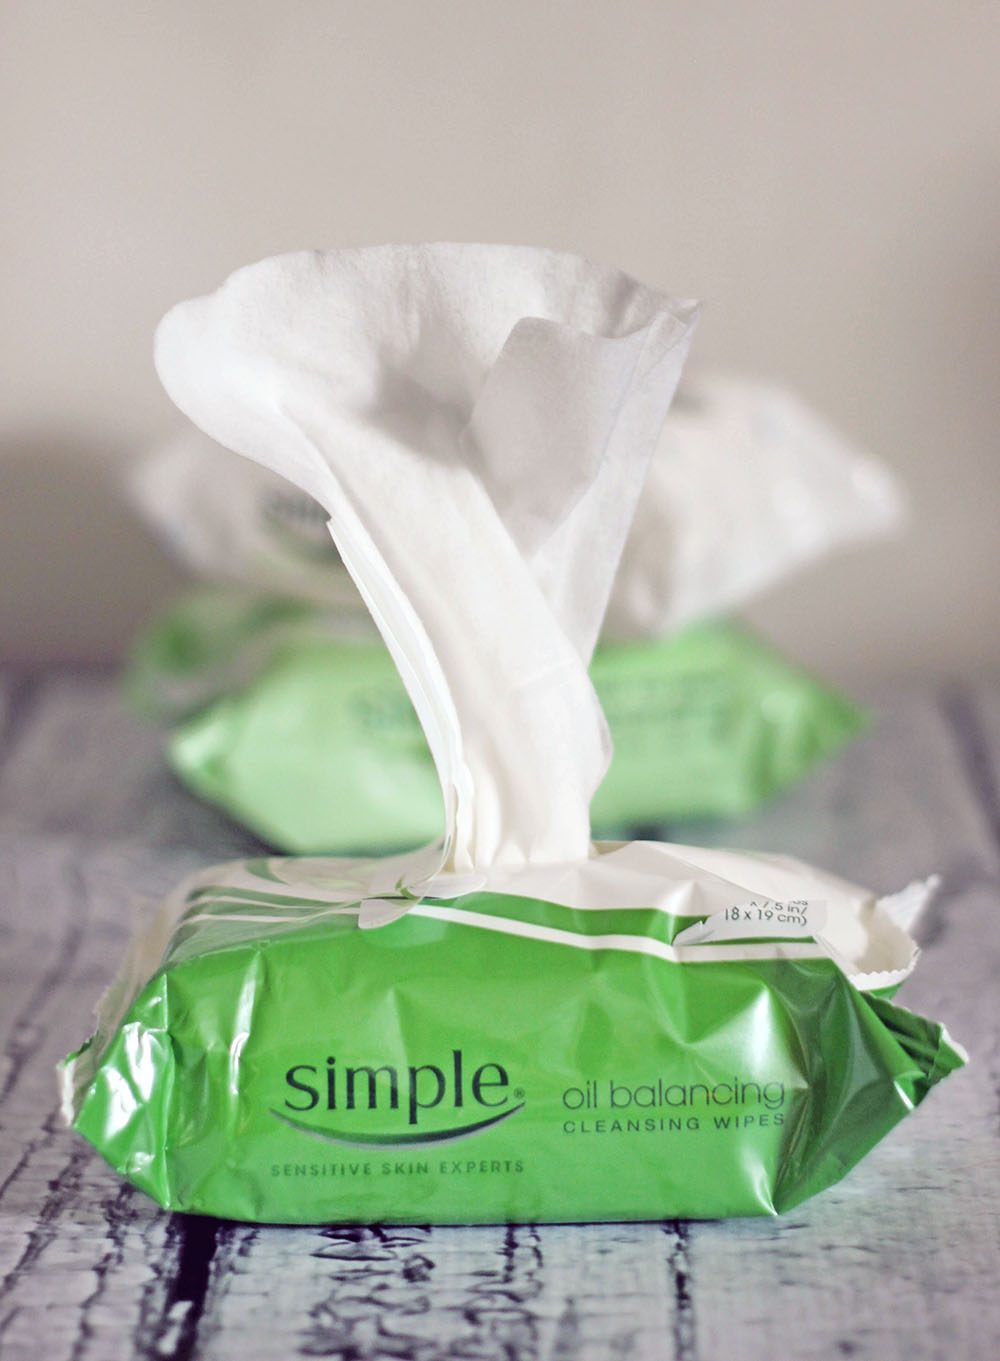 Simple Cleansing Facial Wipes with one pulled out. 